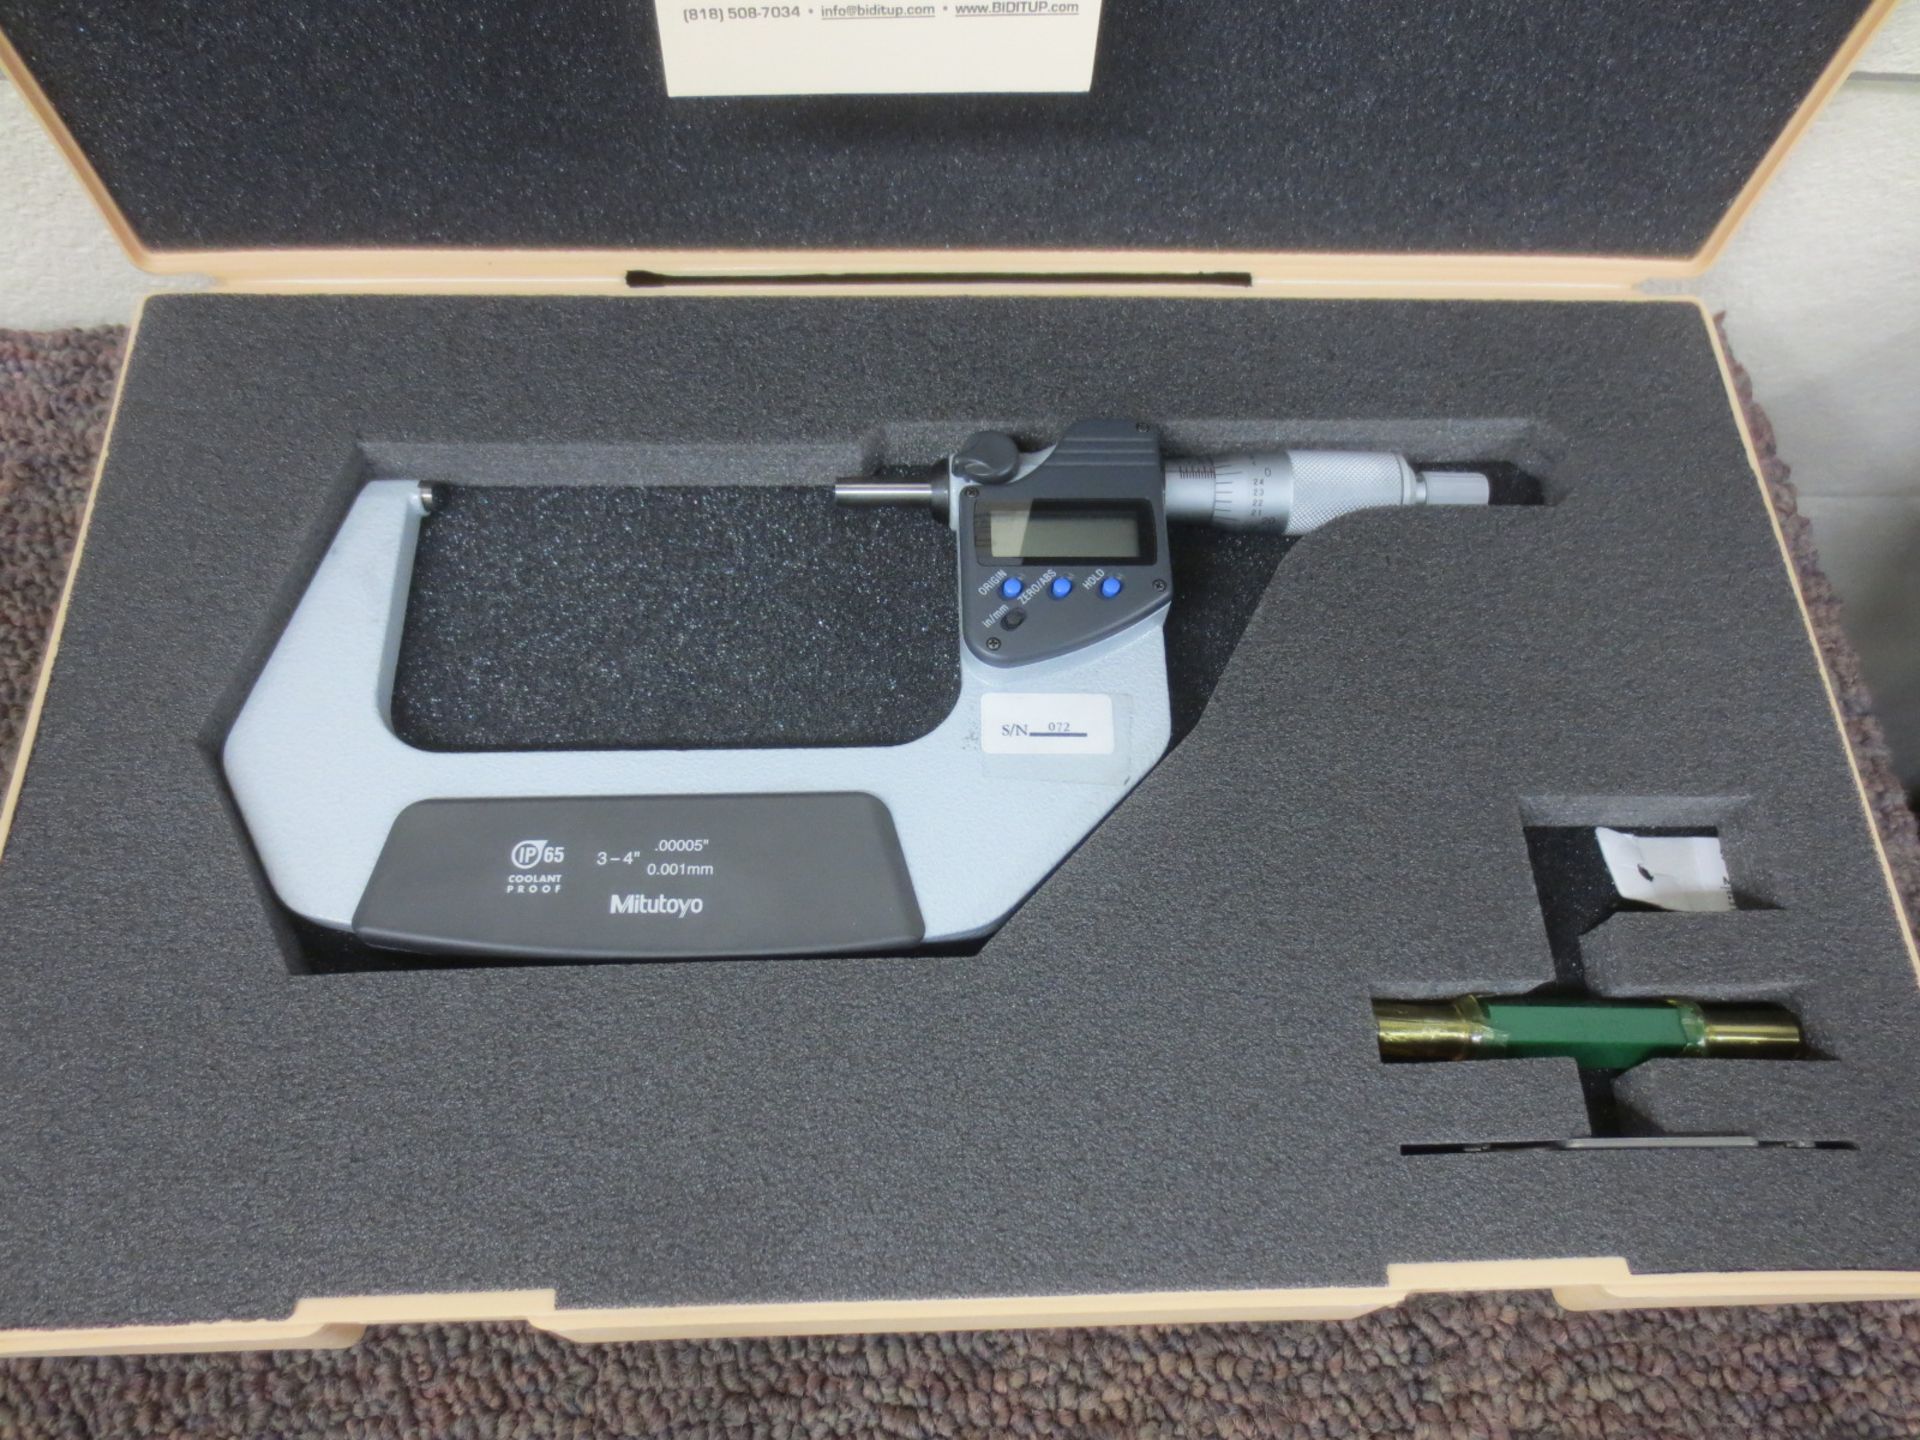 Mitutoyo 3-4'' Micrometer With Digital Readout And Case - Image 2 of 2